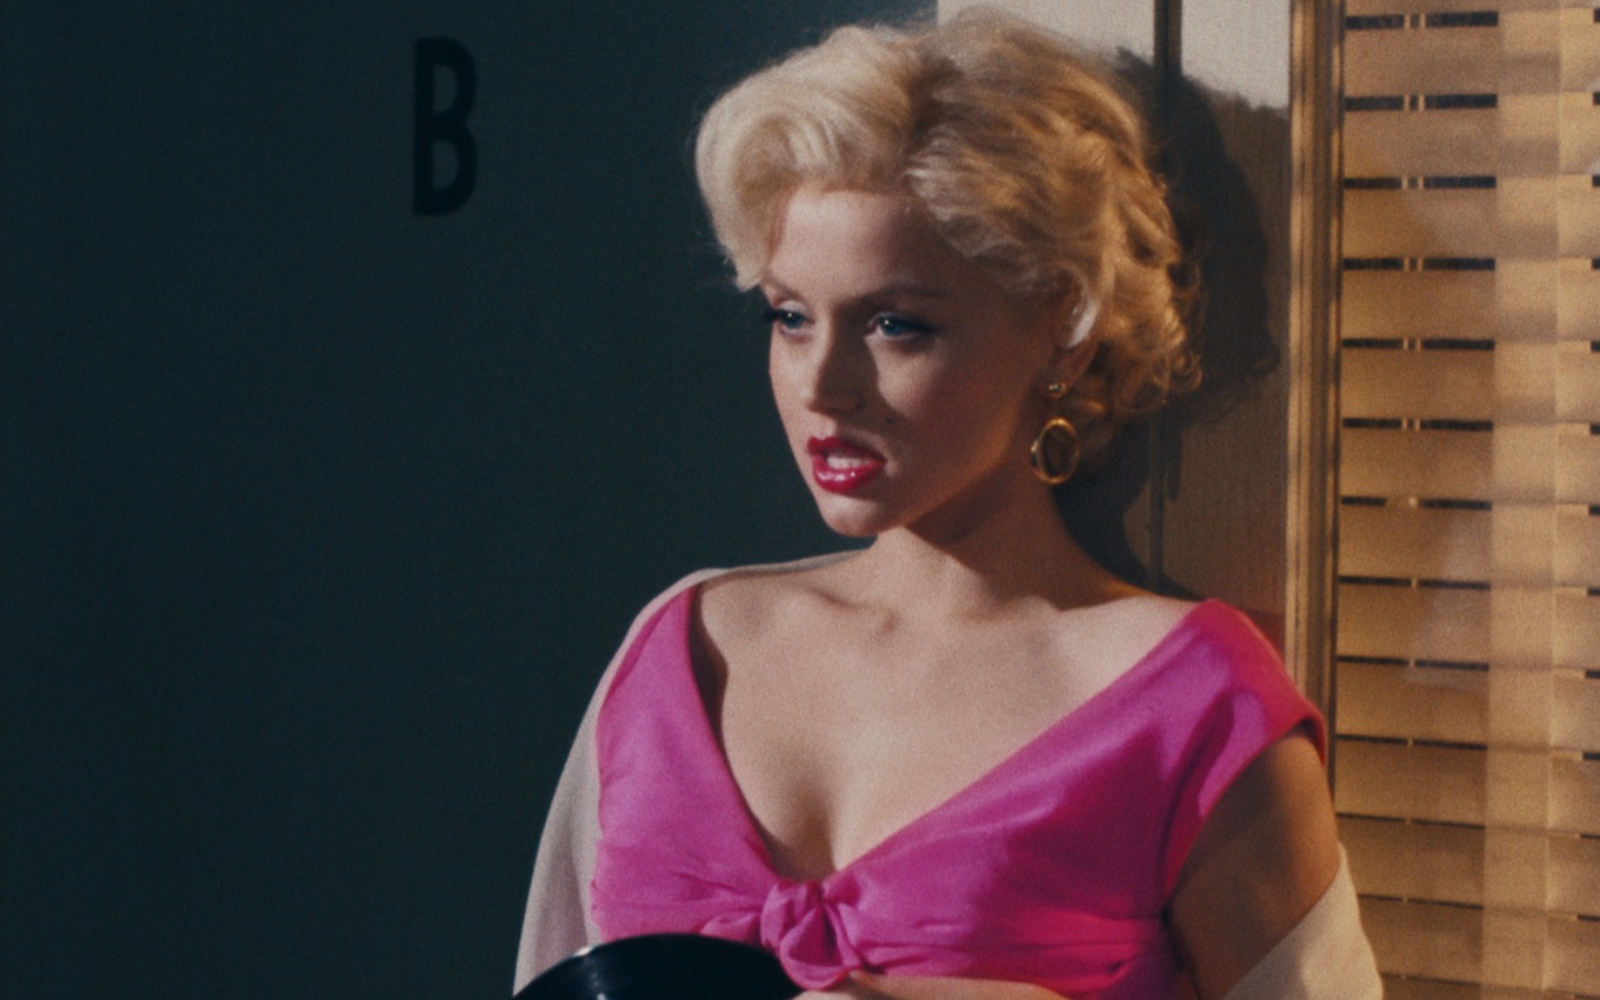 13 Marilyn Monroe-Inspired Styles If You're Already Obsessed with Blonde